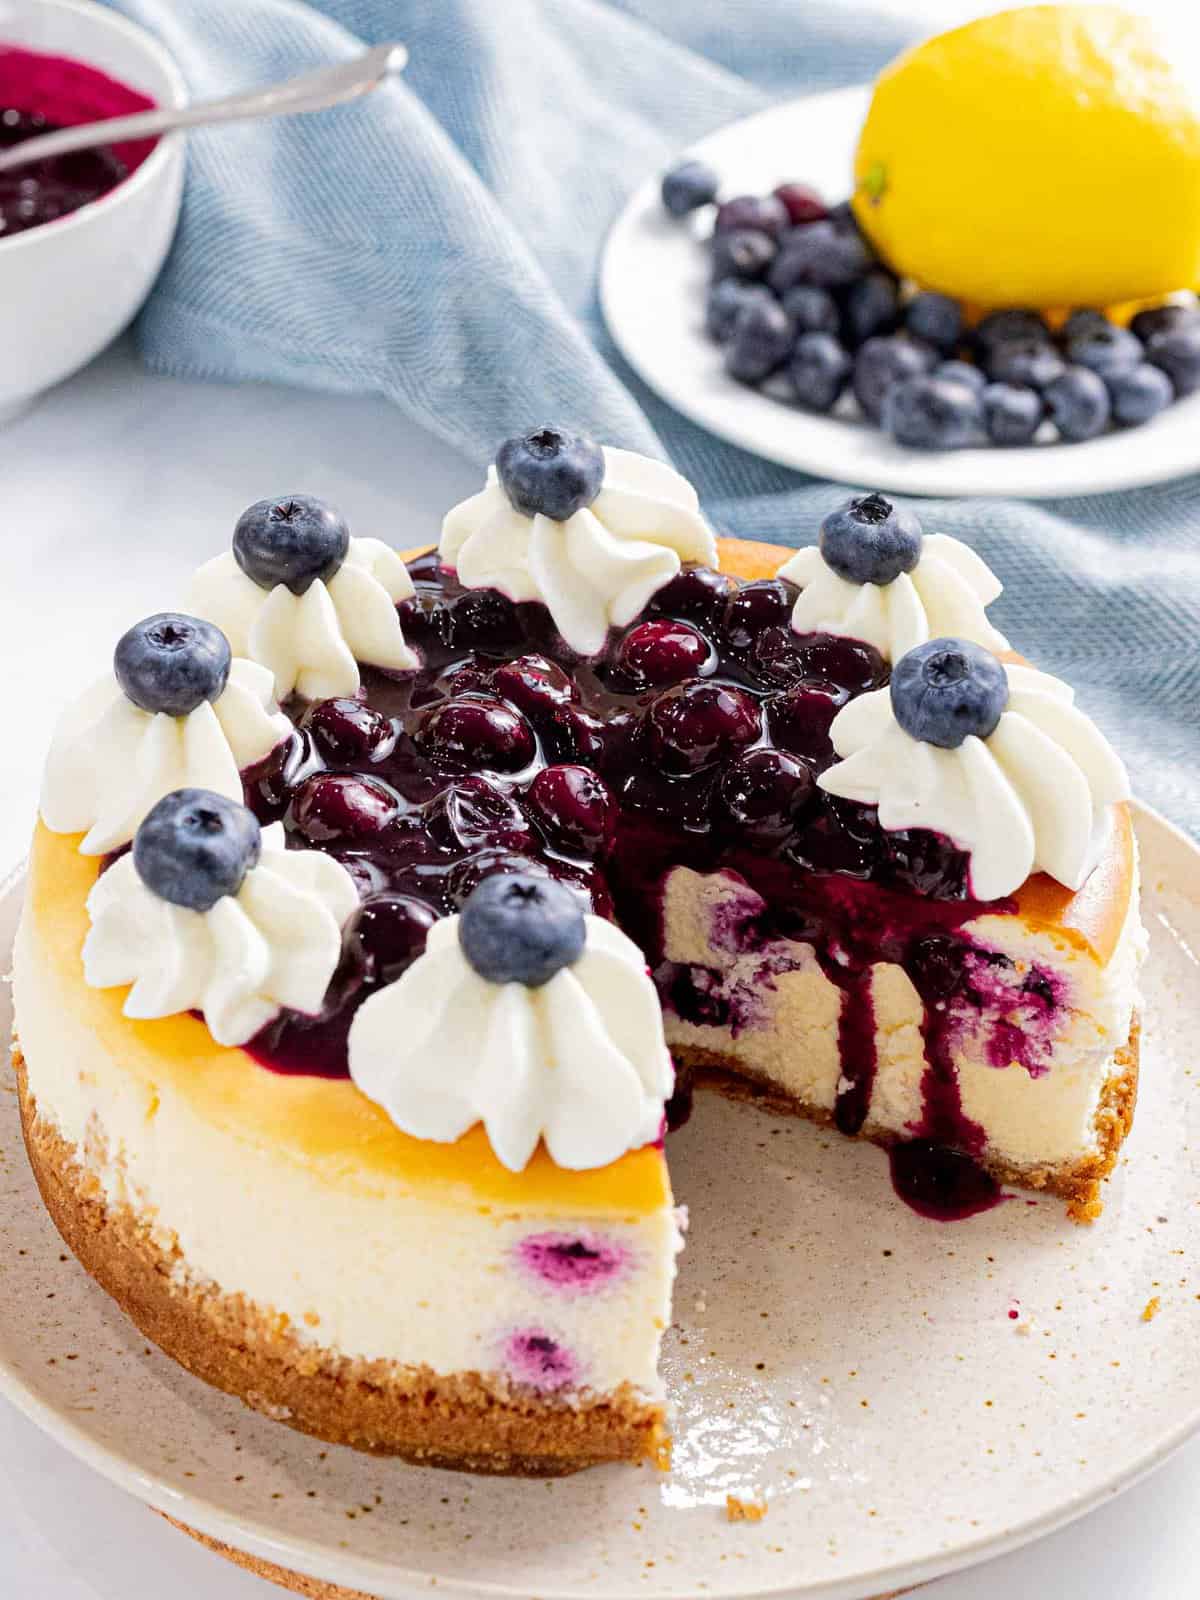 Blueberry cheesecake made with fresh blueberries and topped with blueberry sauce.